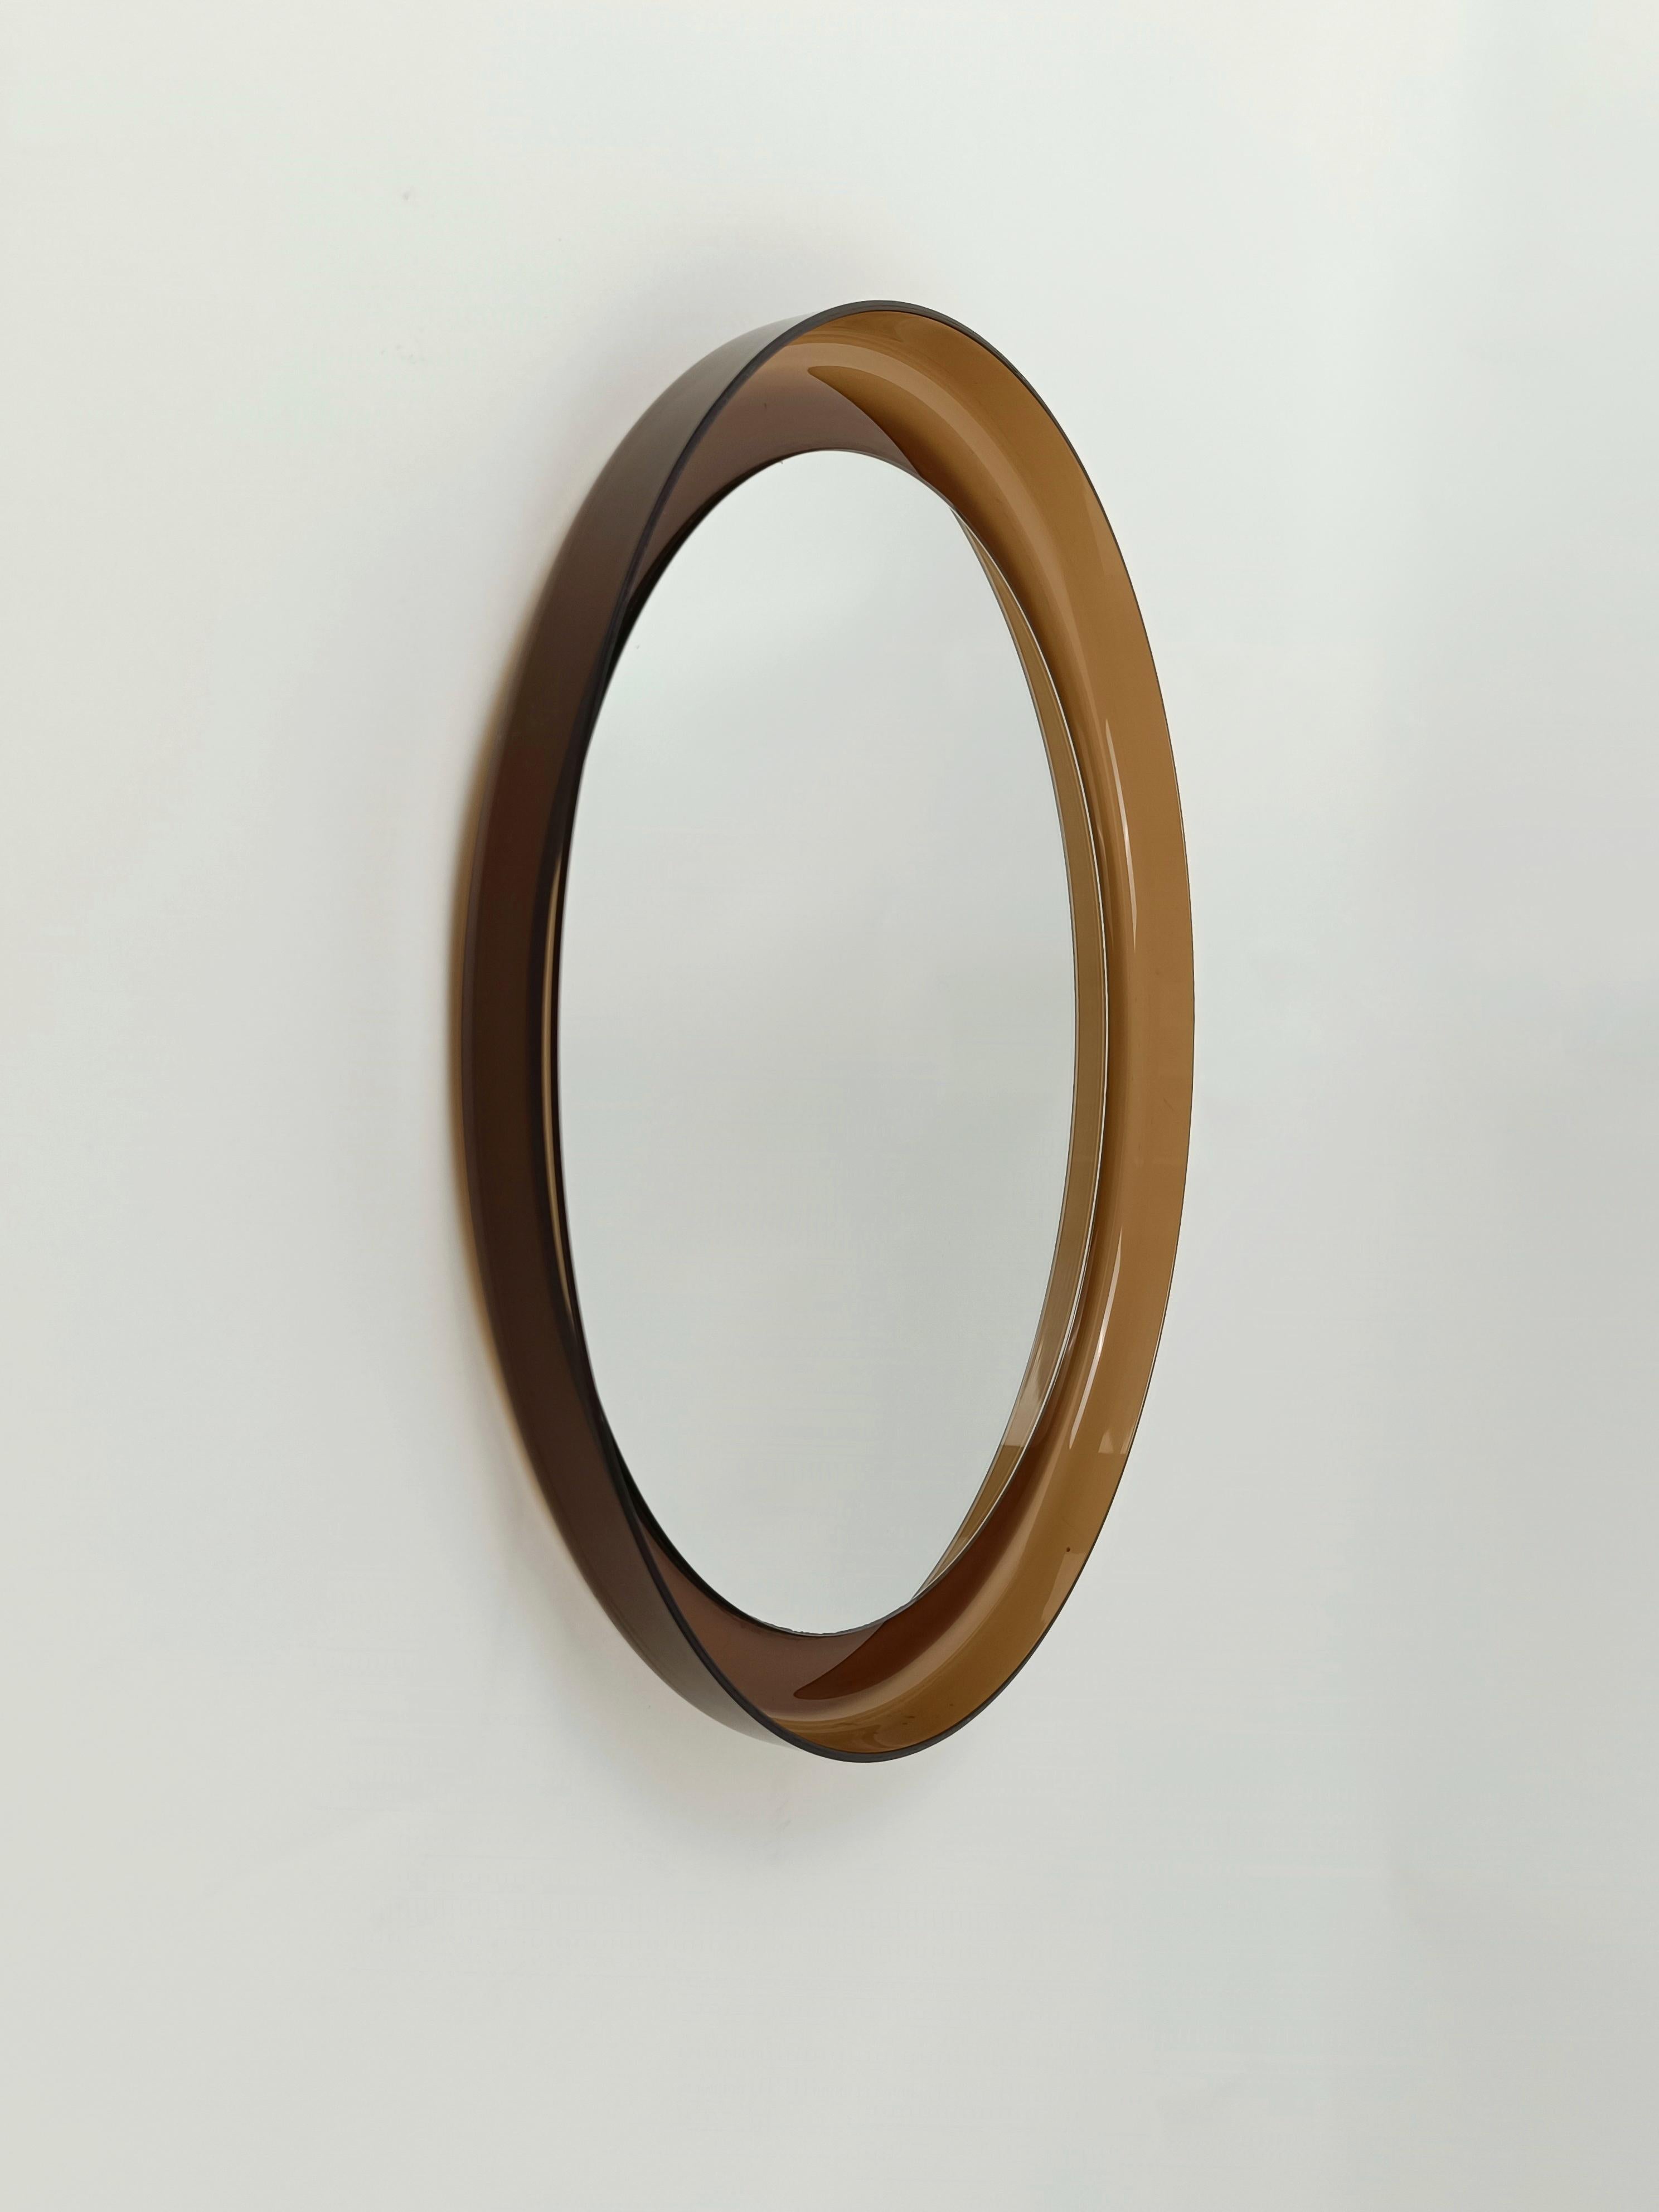 An Italian Space Age Round Mirror in Smoked Lucite by Guzzini 1960s  For Sale 5